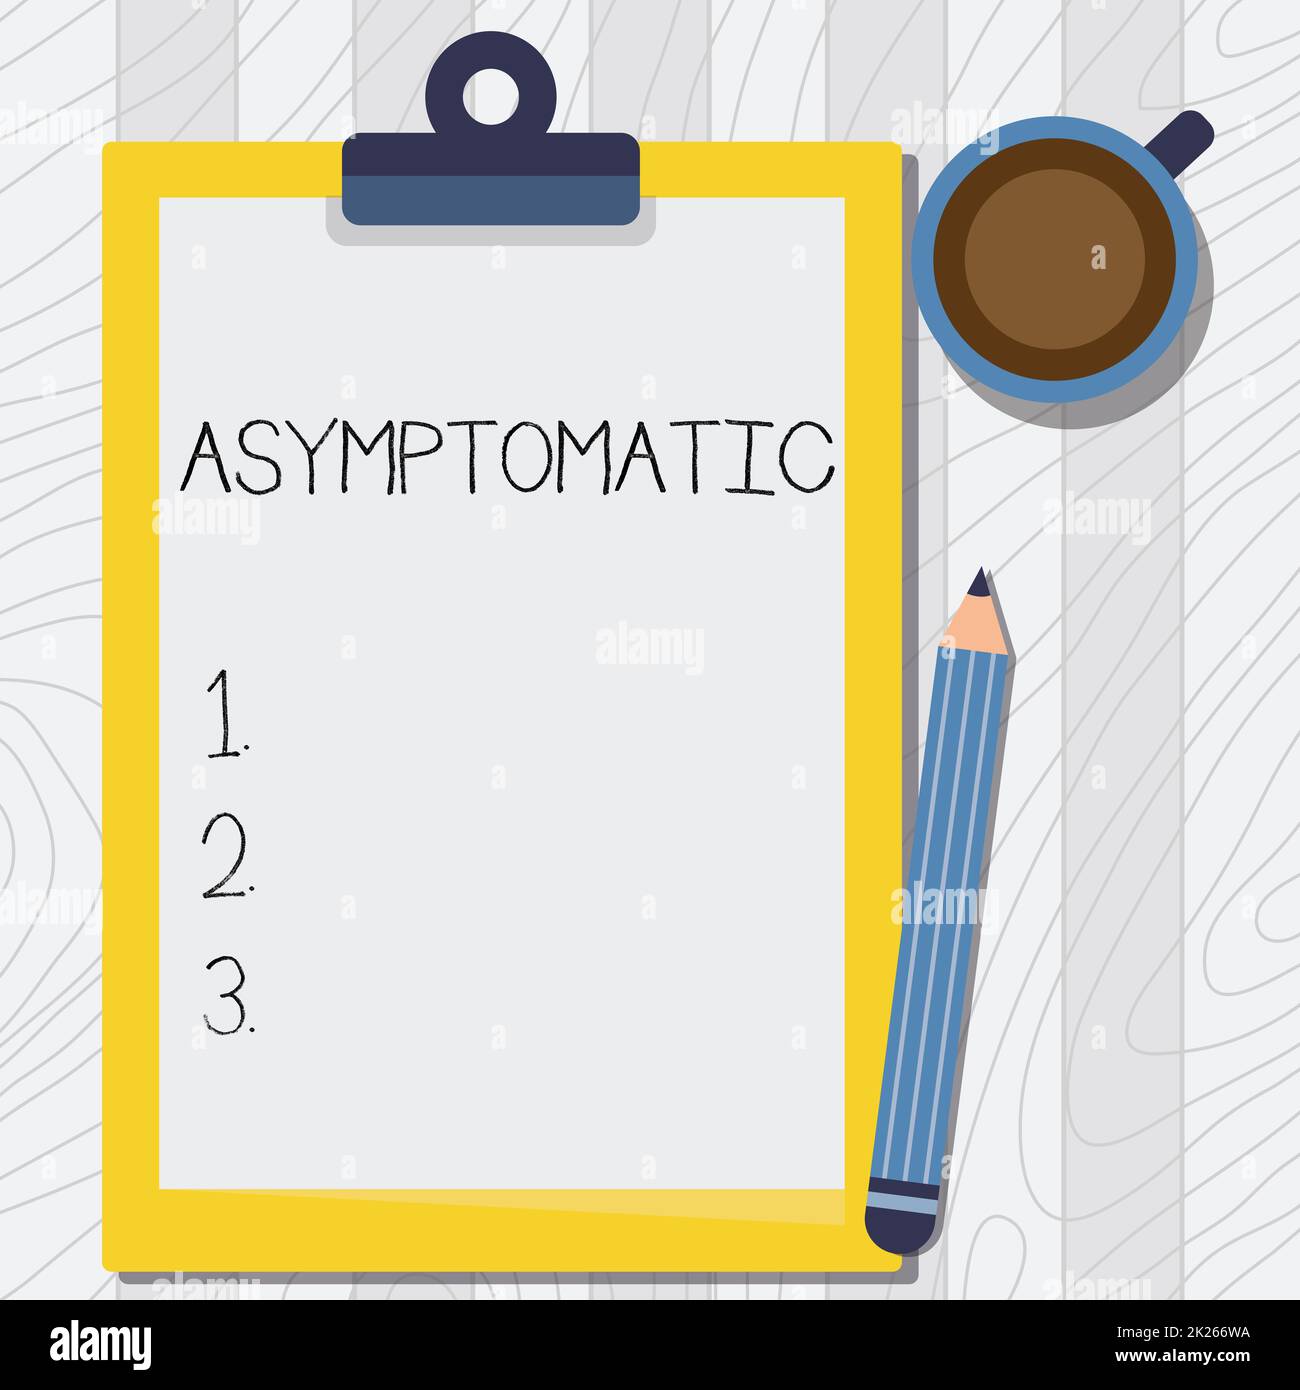 Writing displaying text Asymptomatic. Internet Concept a condition or a person producing or showing no symptoms Illustration Of Pencil On Top Of Table Beside The Clipboard And Coffee Mug. Stock Photo